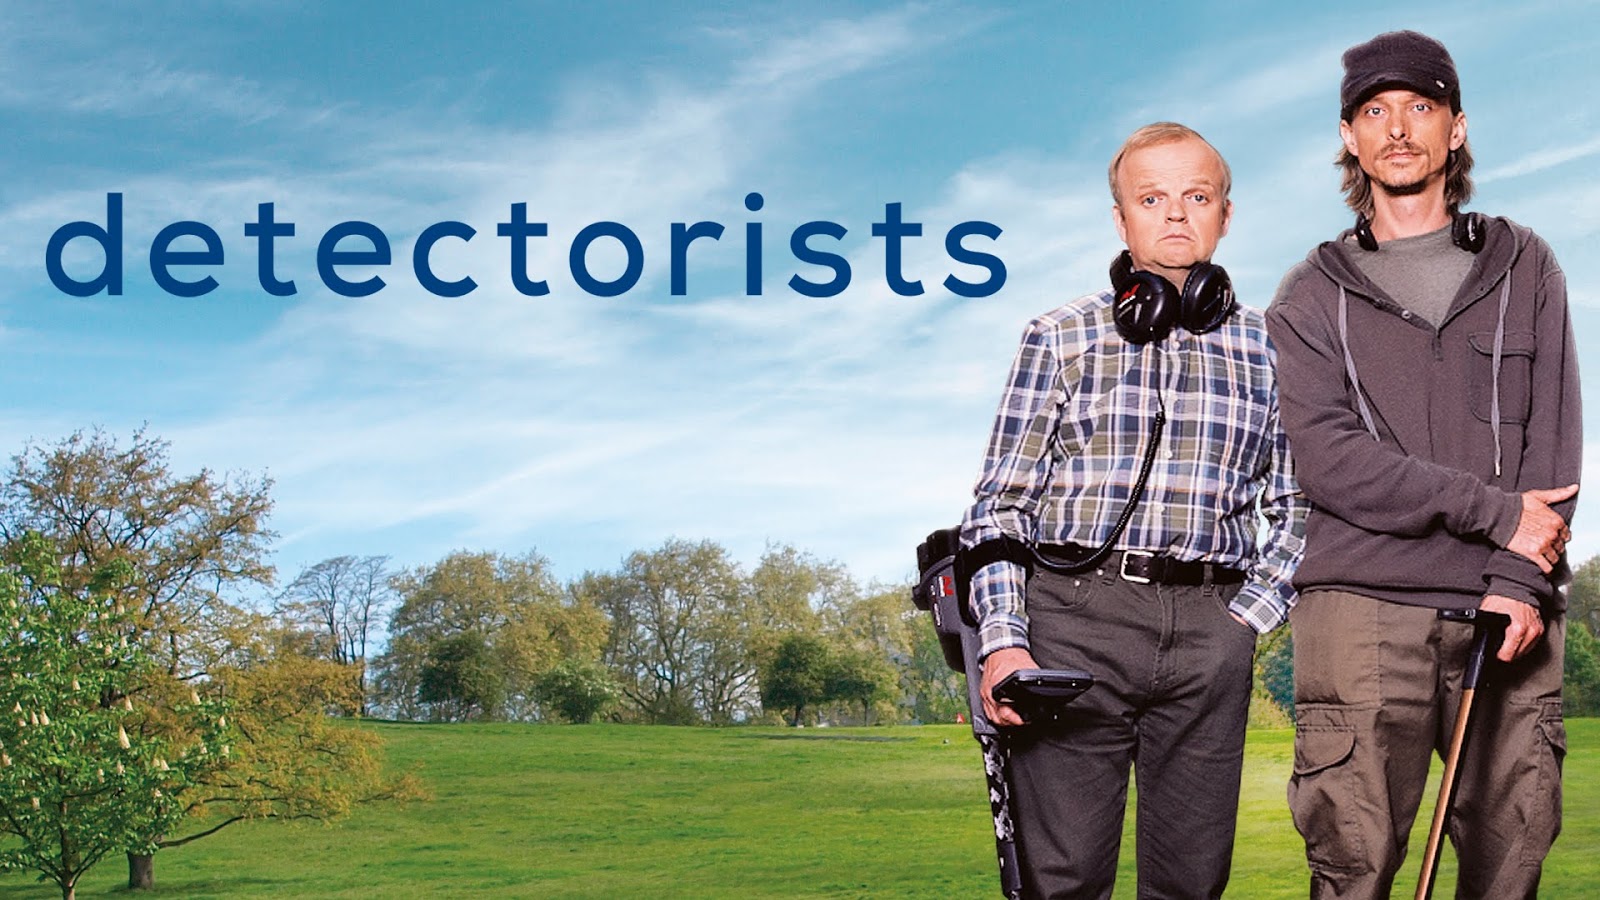 Cover Title of the TV series "Detectorists"